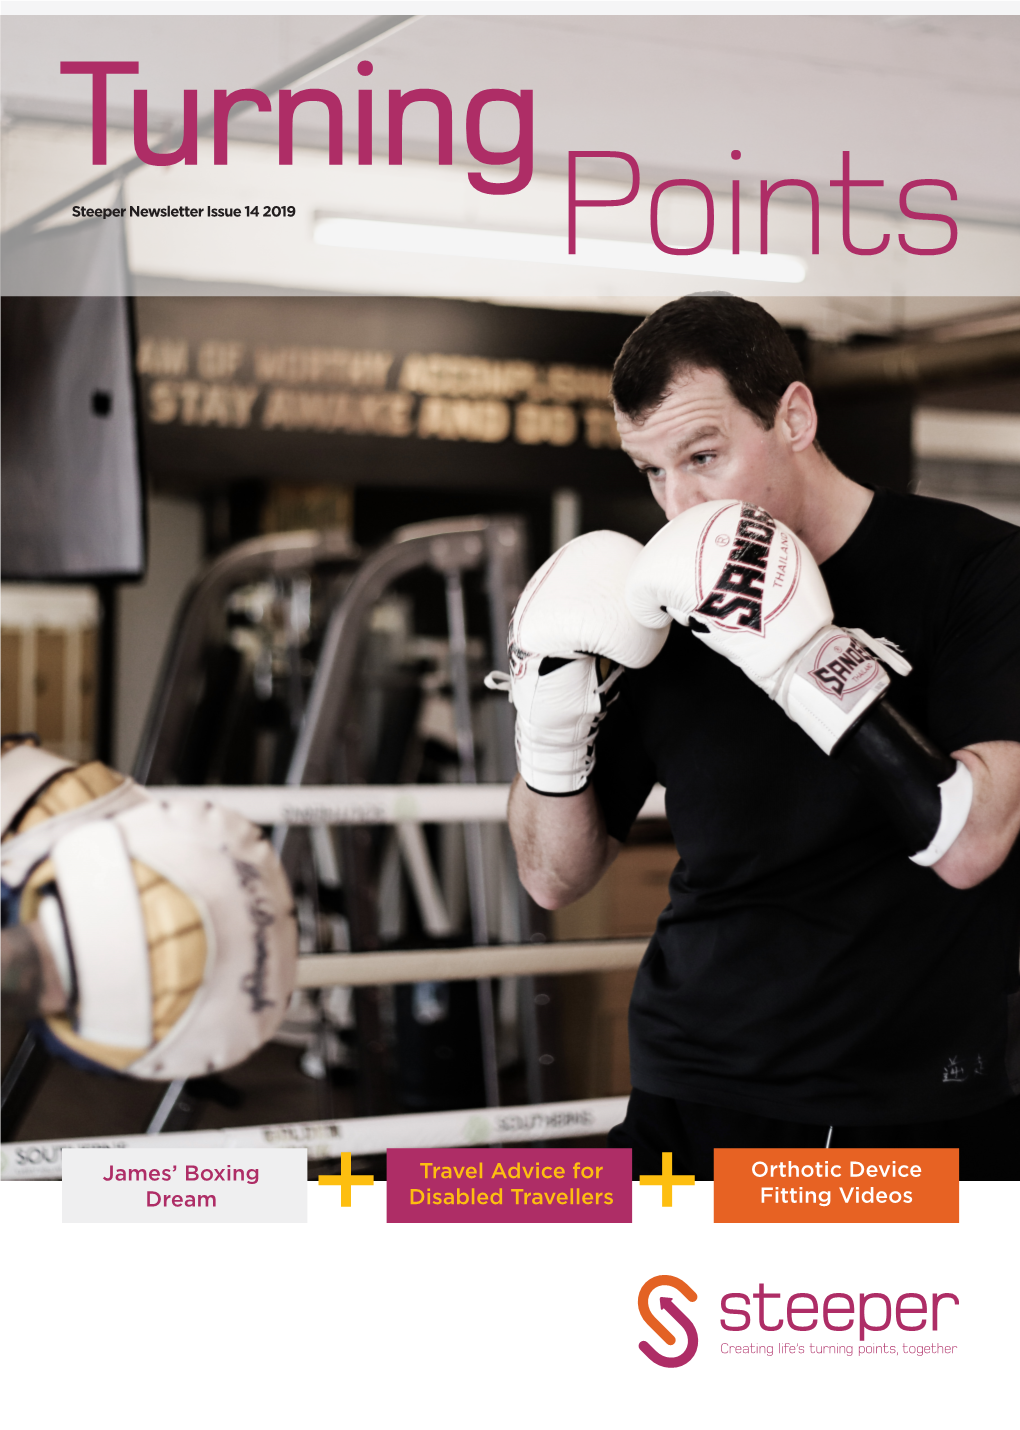 James' Boxing Dream Travel Advice for Disabled Travellers Orthotic